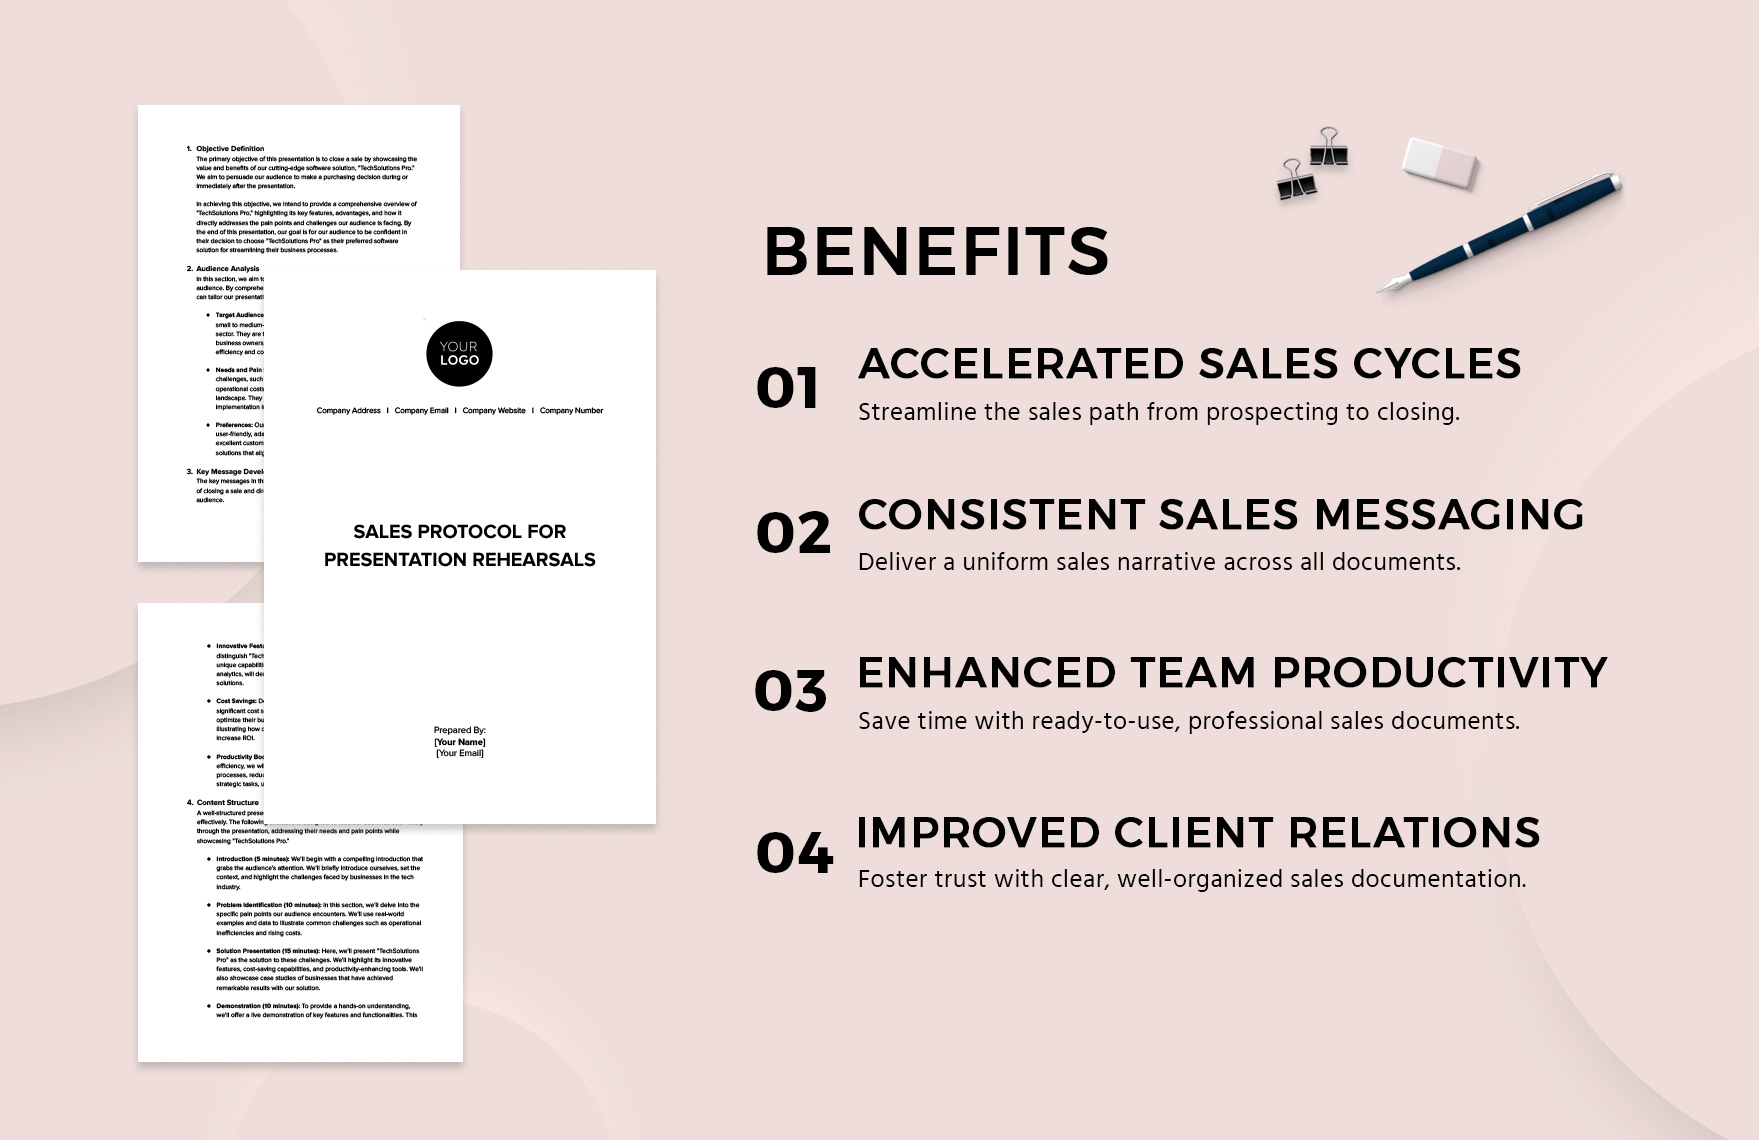 Sales Protocol for Presentation Rehearsals Template